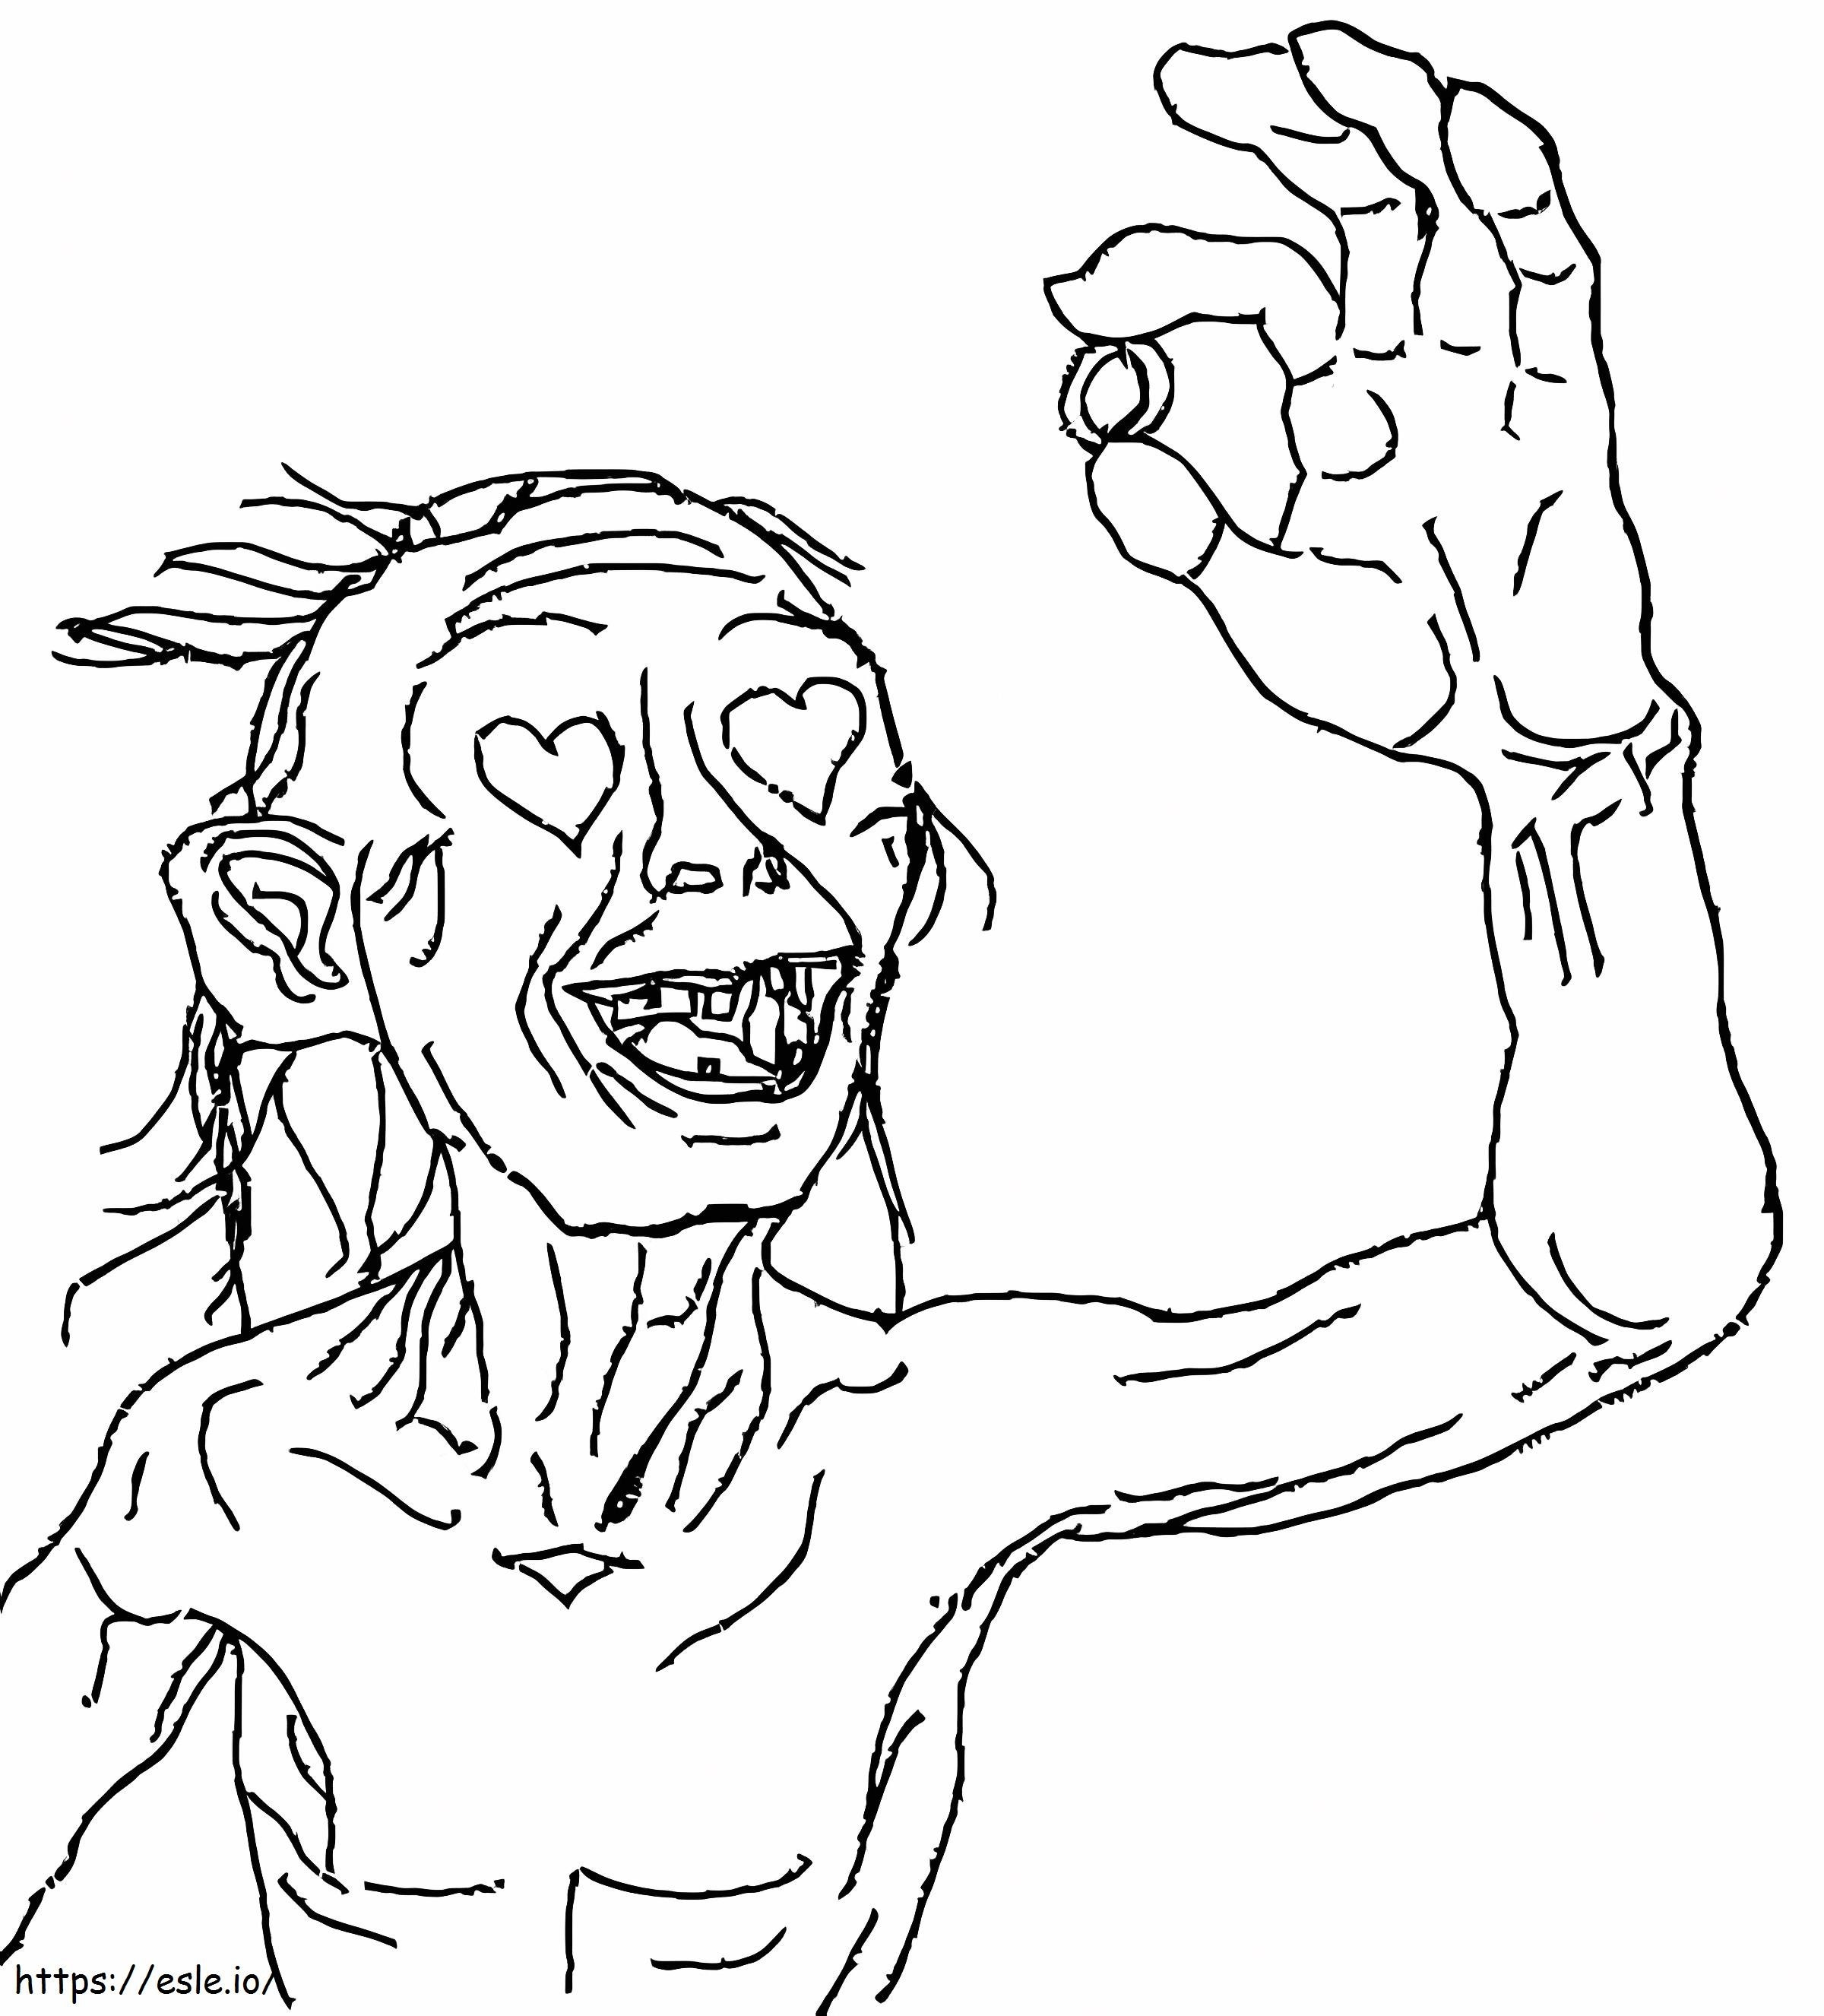 Gollum 1 coloring page